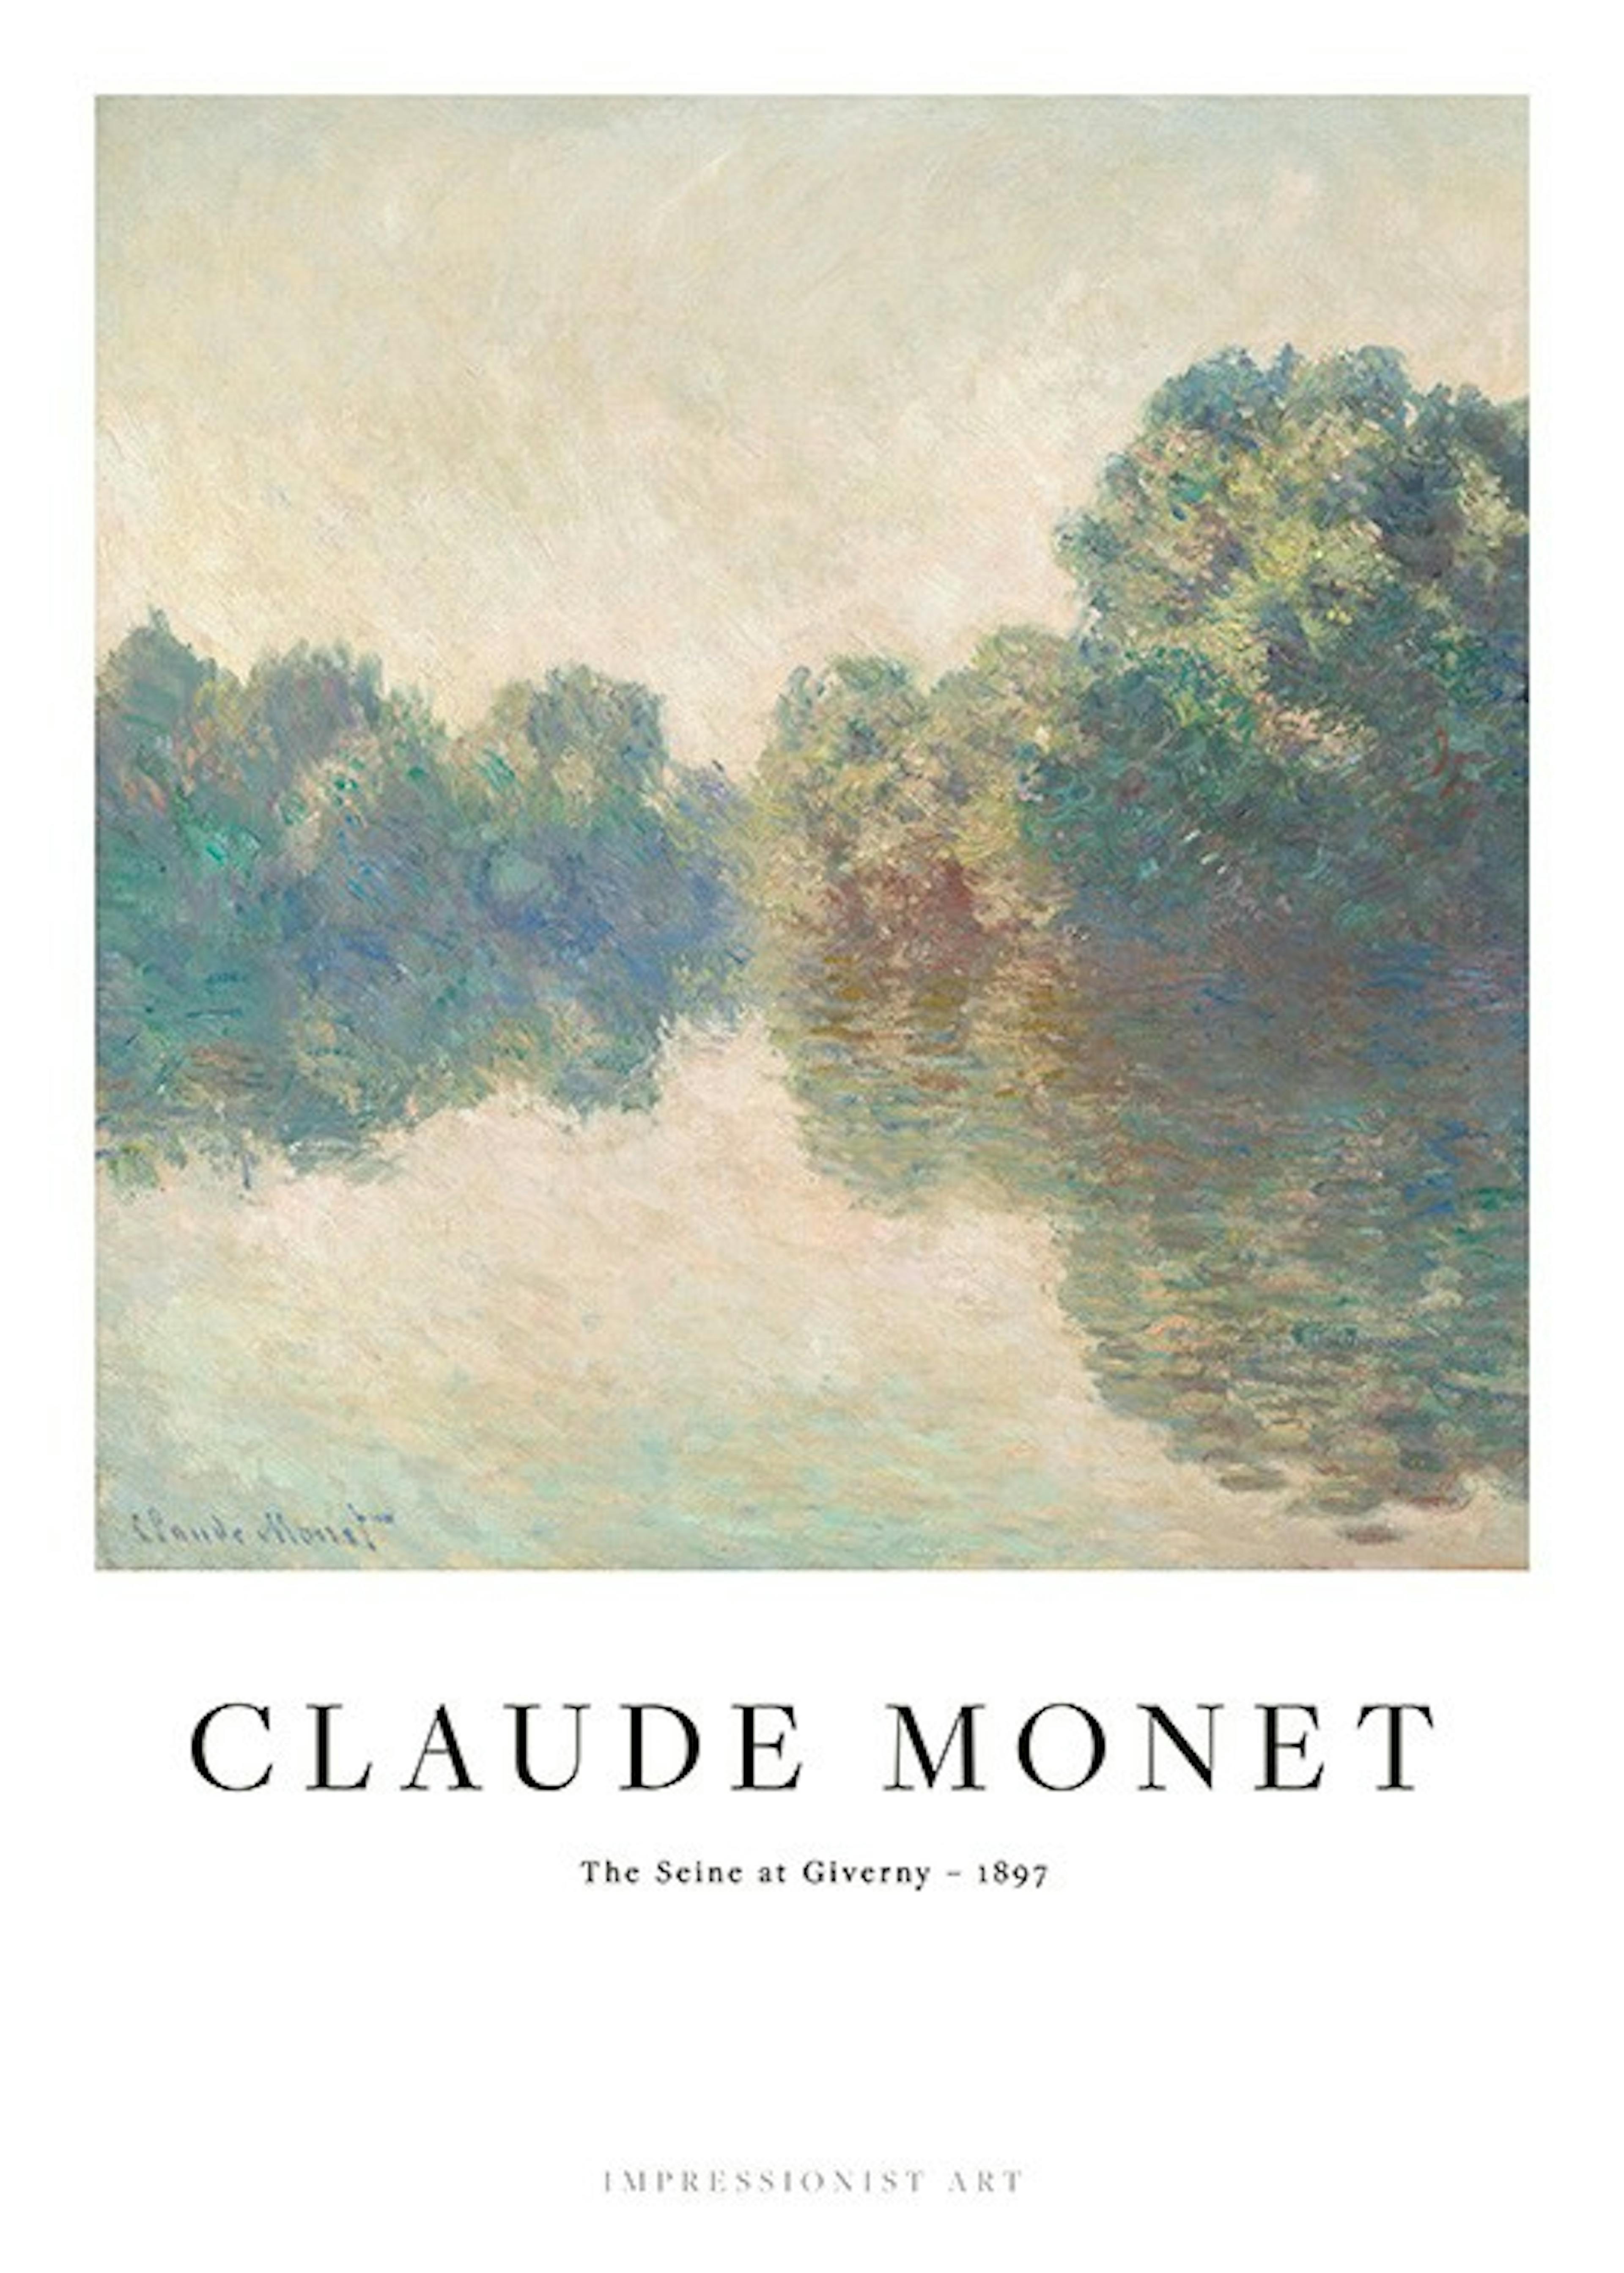 Monet - The Seine at Giverny Plakat 0